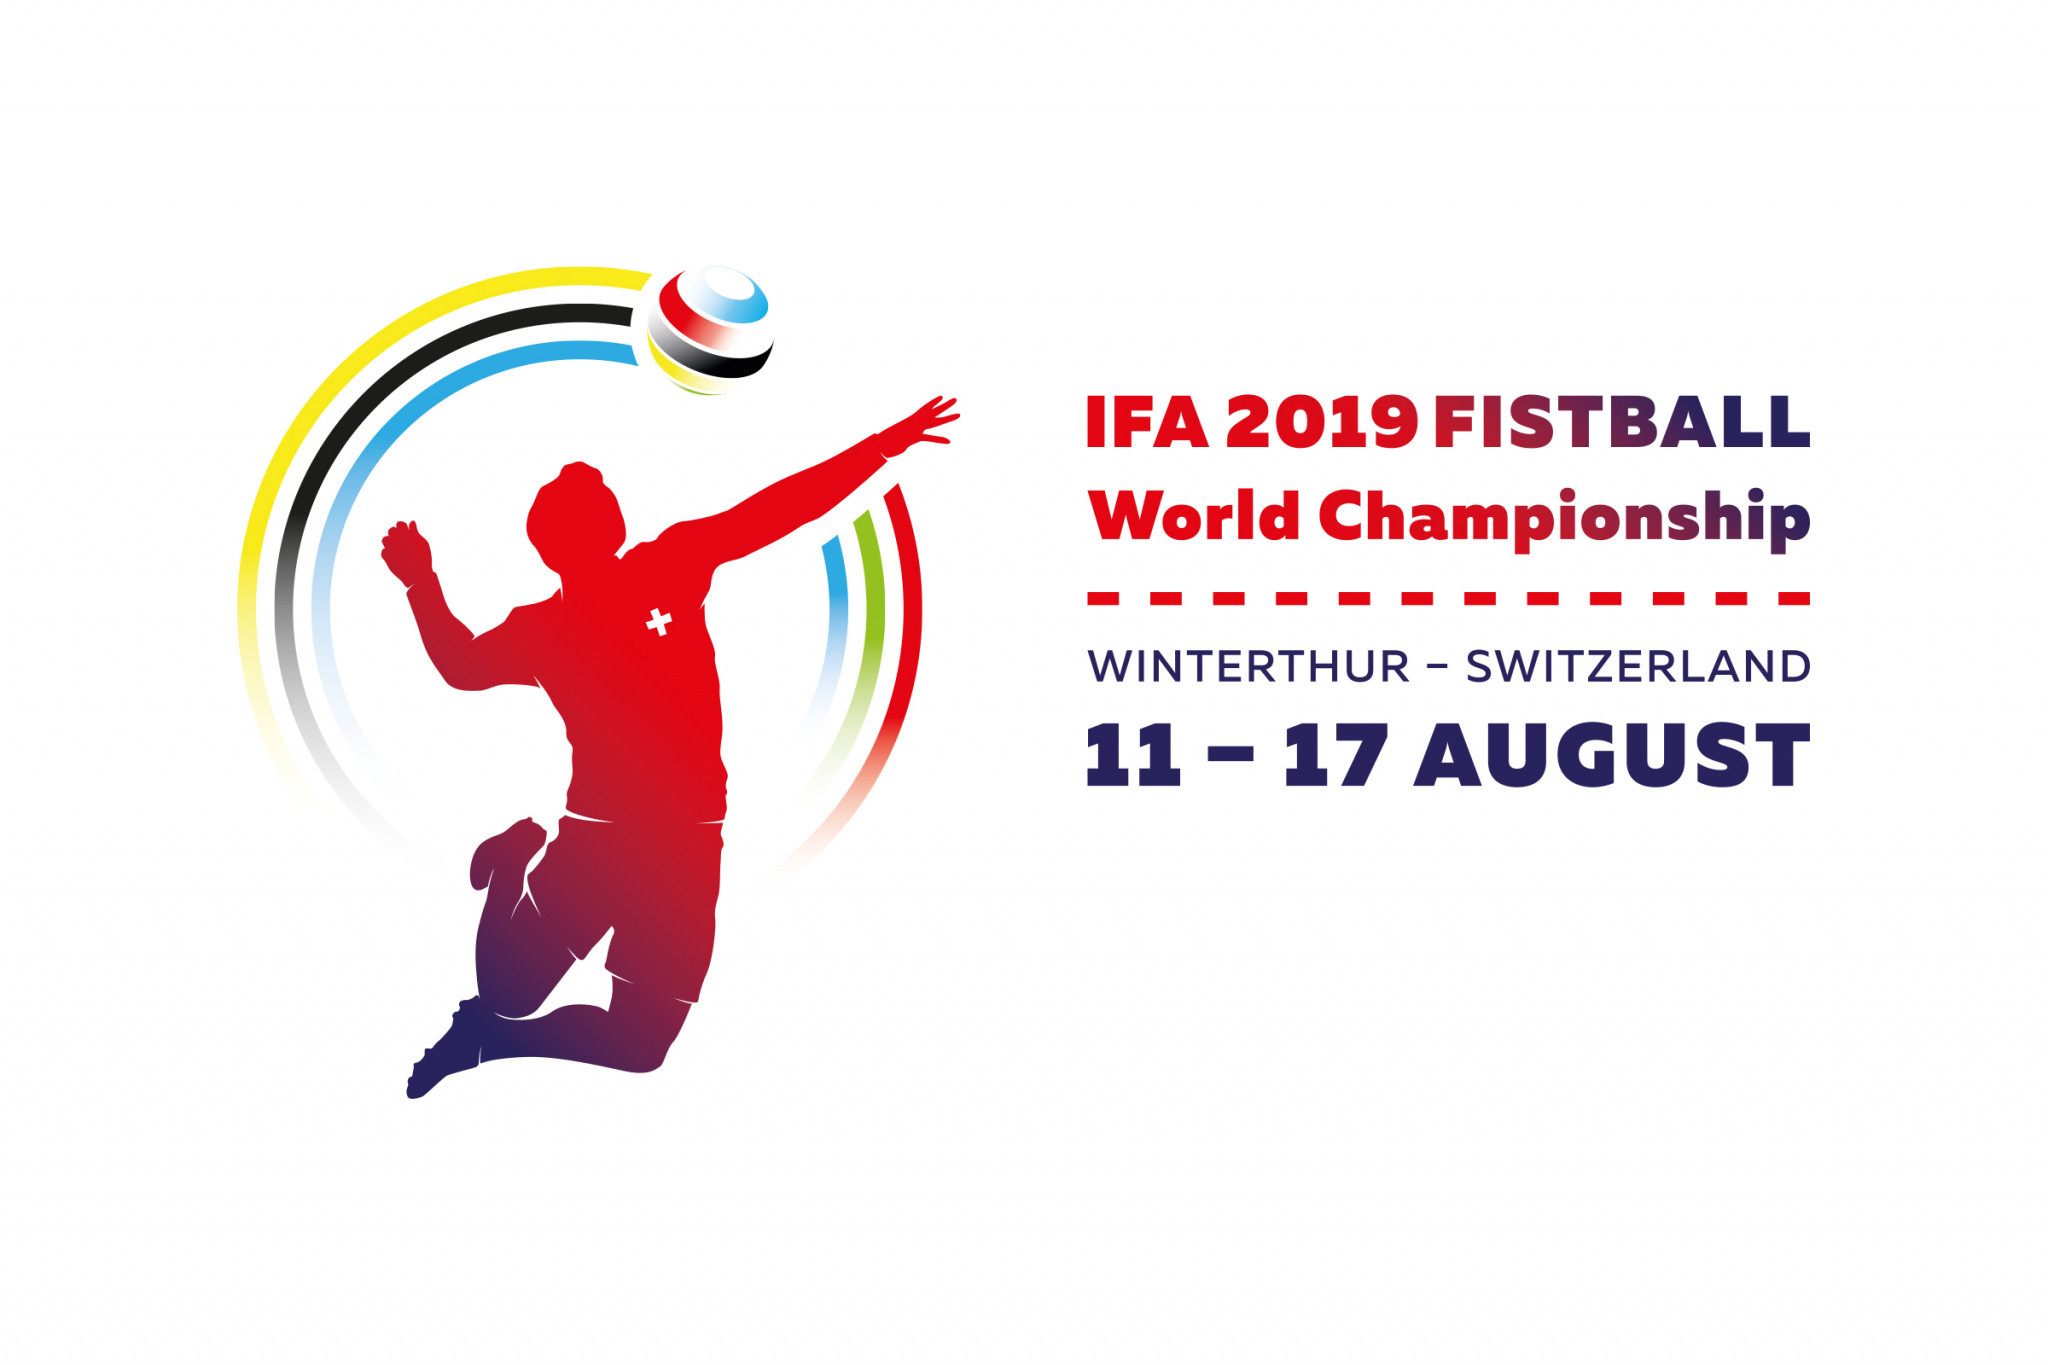 Swiss hopes of first World Fistball Championship title boosted by return of top player